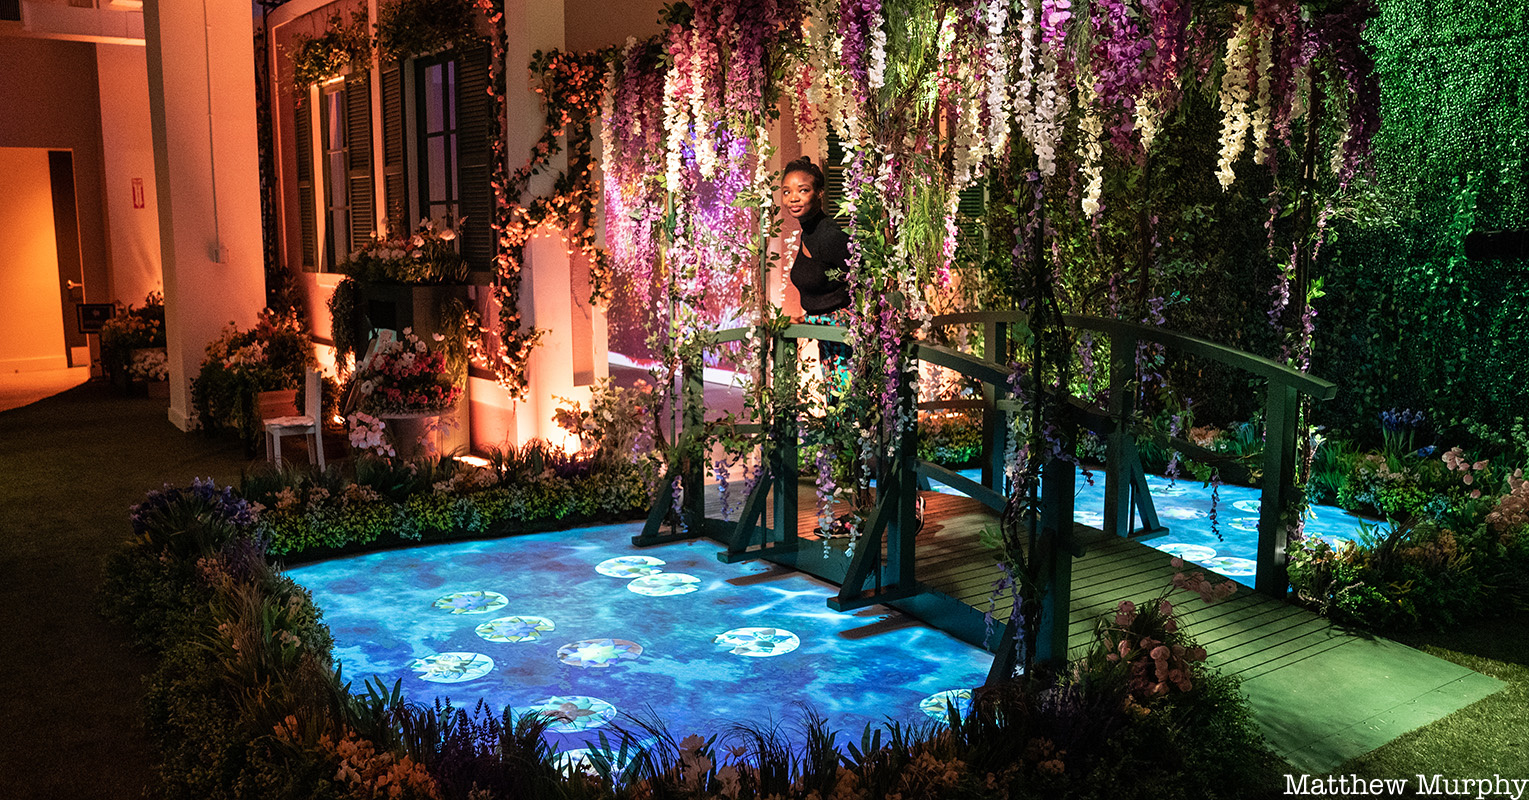 A woman stands on a flower covered bridge over looking a Monet painting projected on the floor at Monet's Garden